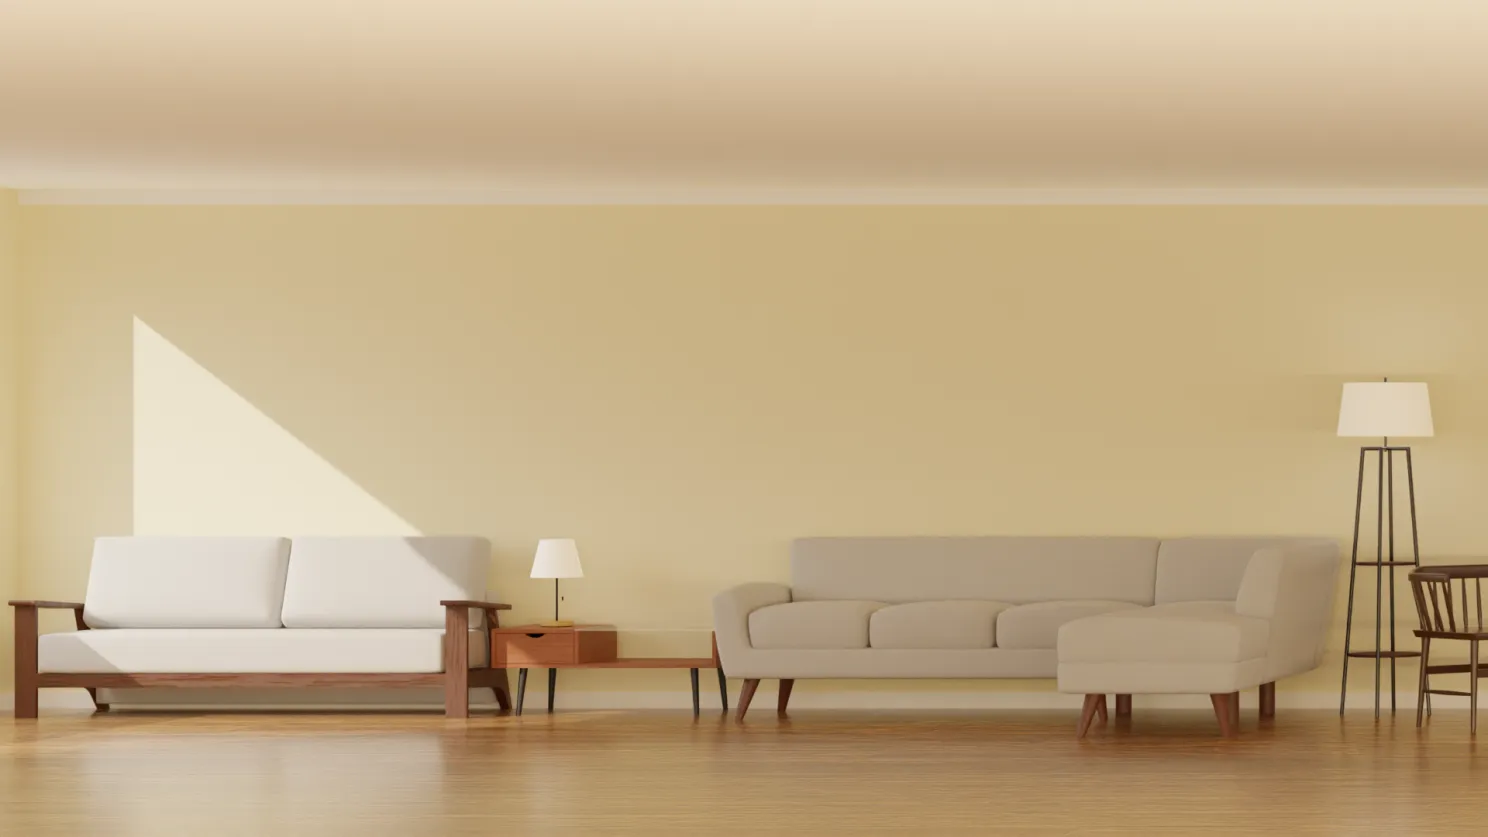 Examples of customizable models of sofa, side tables, floor lamp and chair